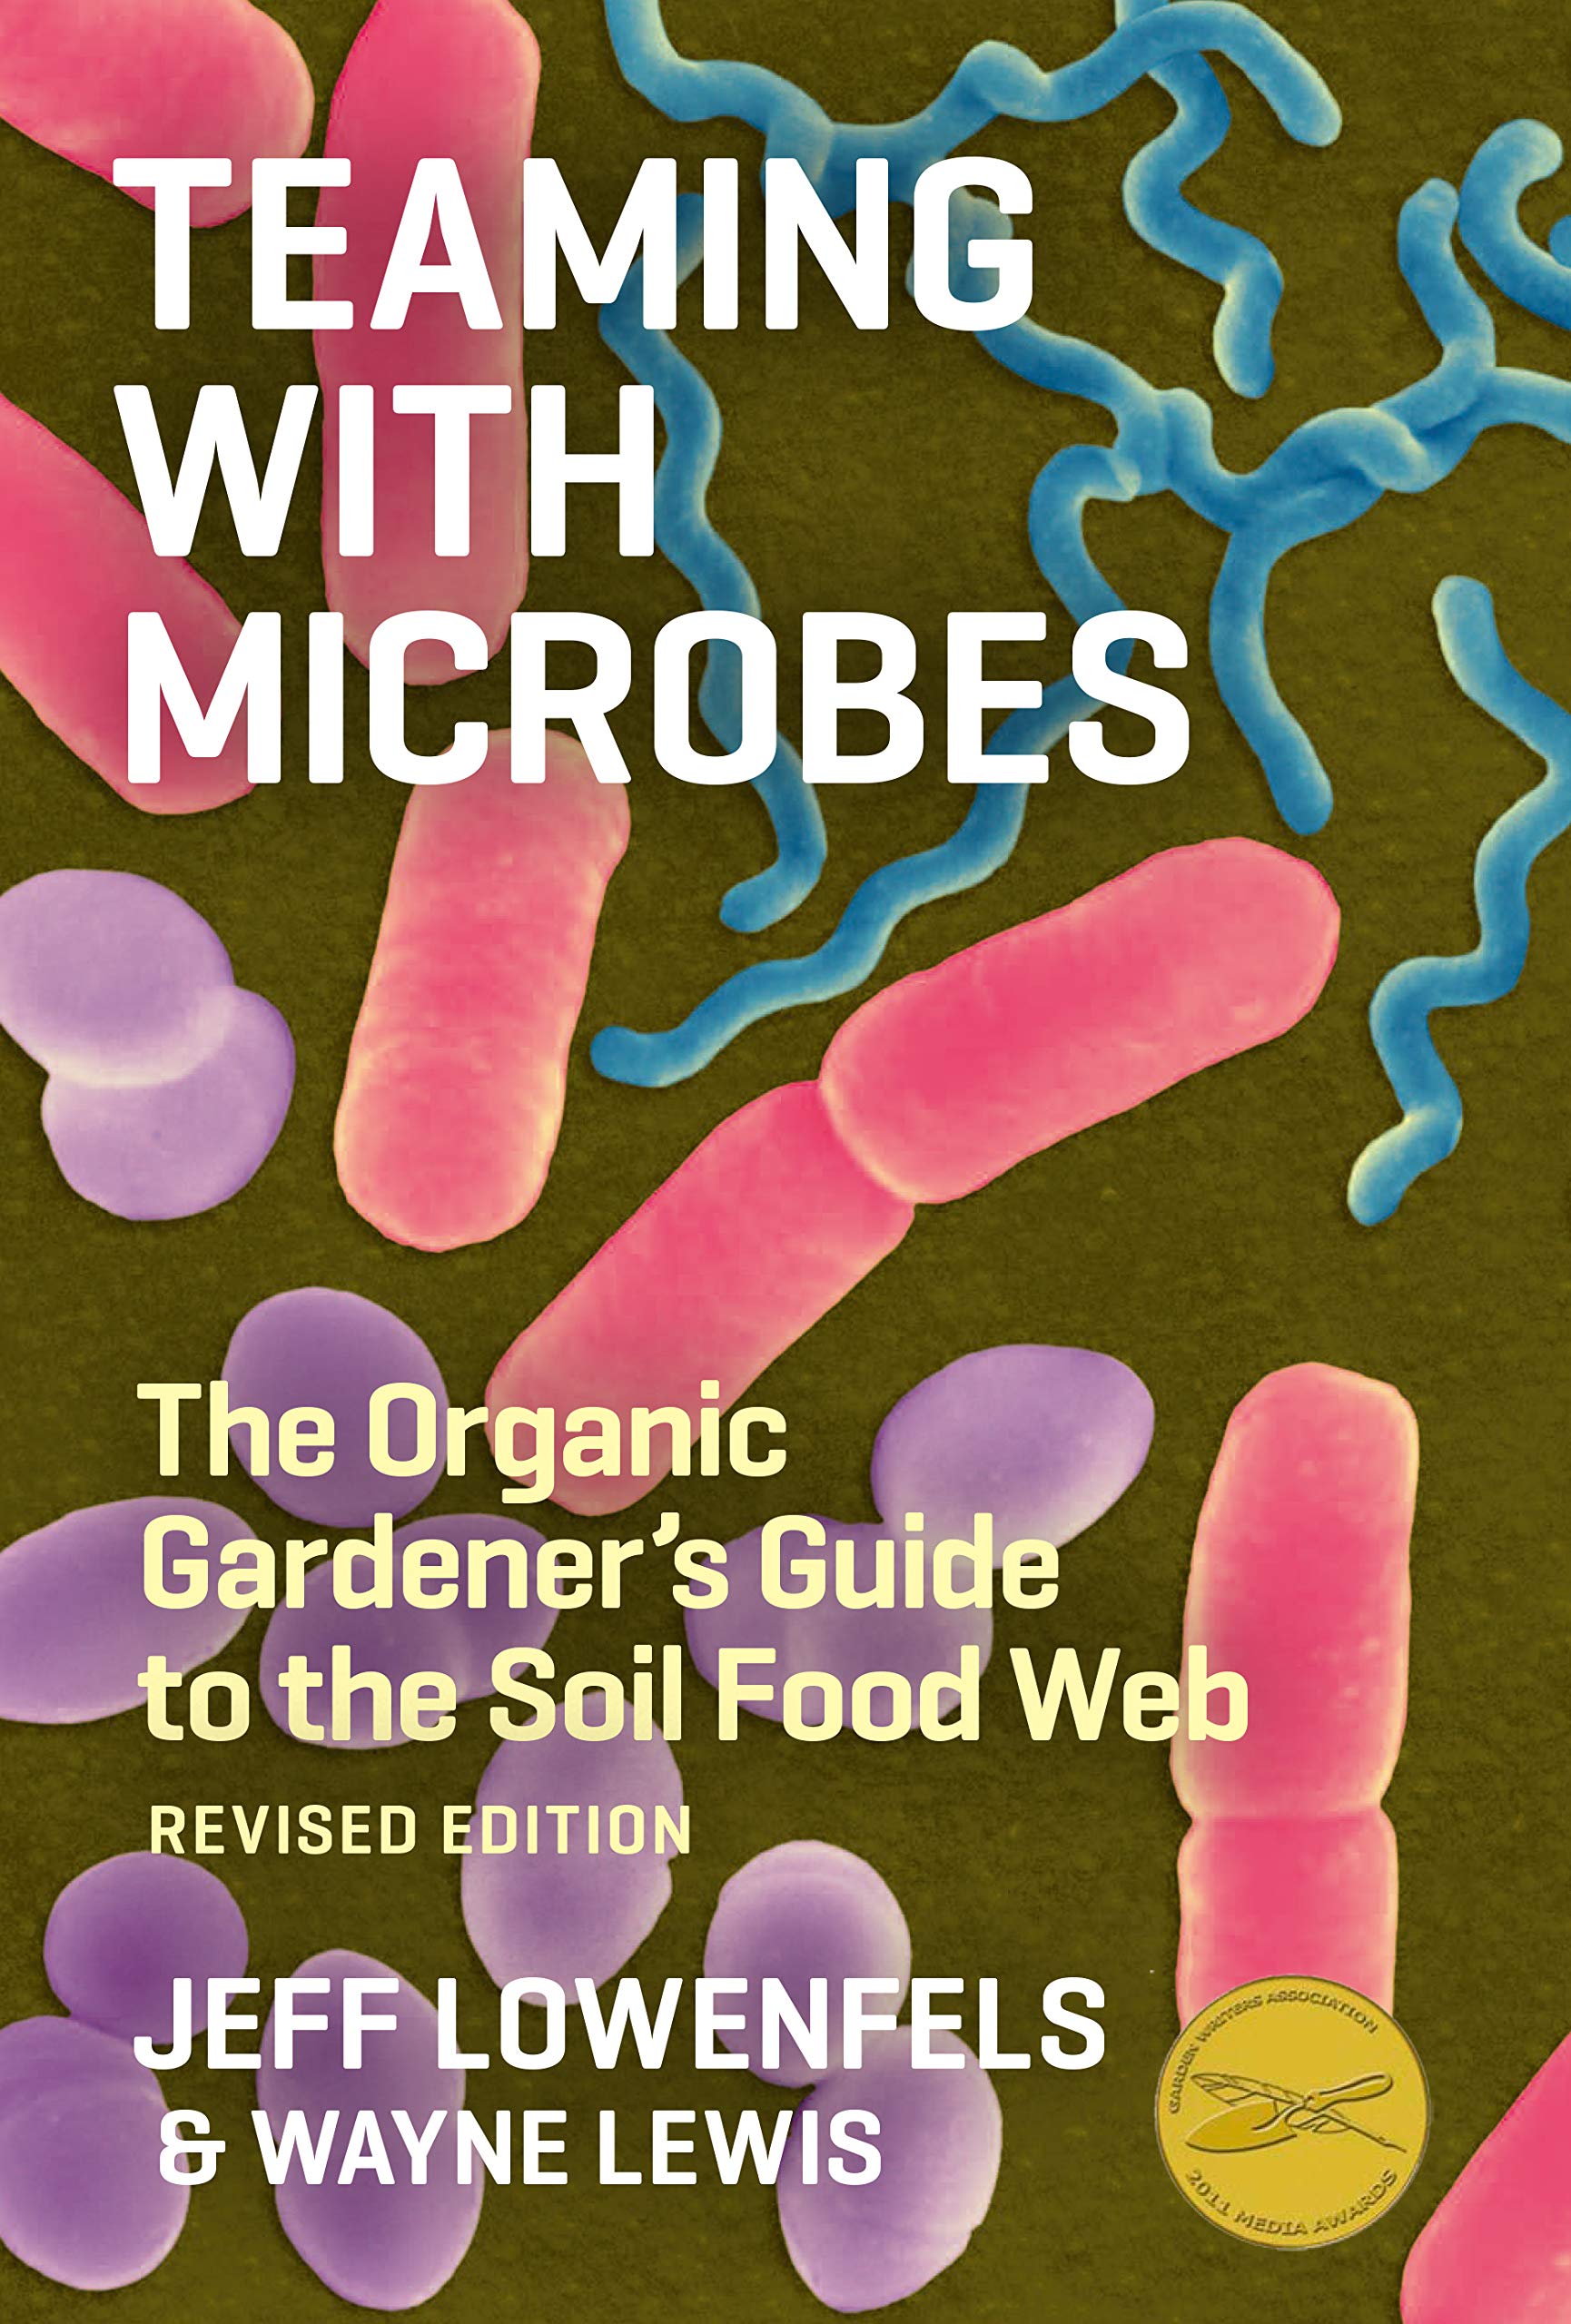 Image Teaming with microbes : the organic gardener's guide to the soil food web